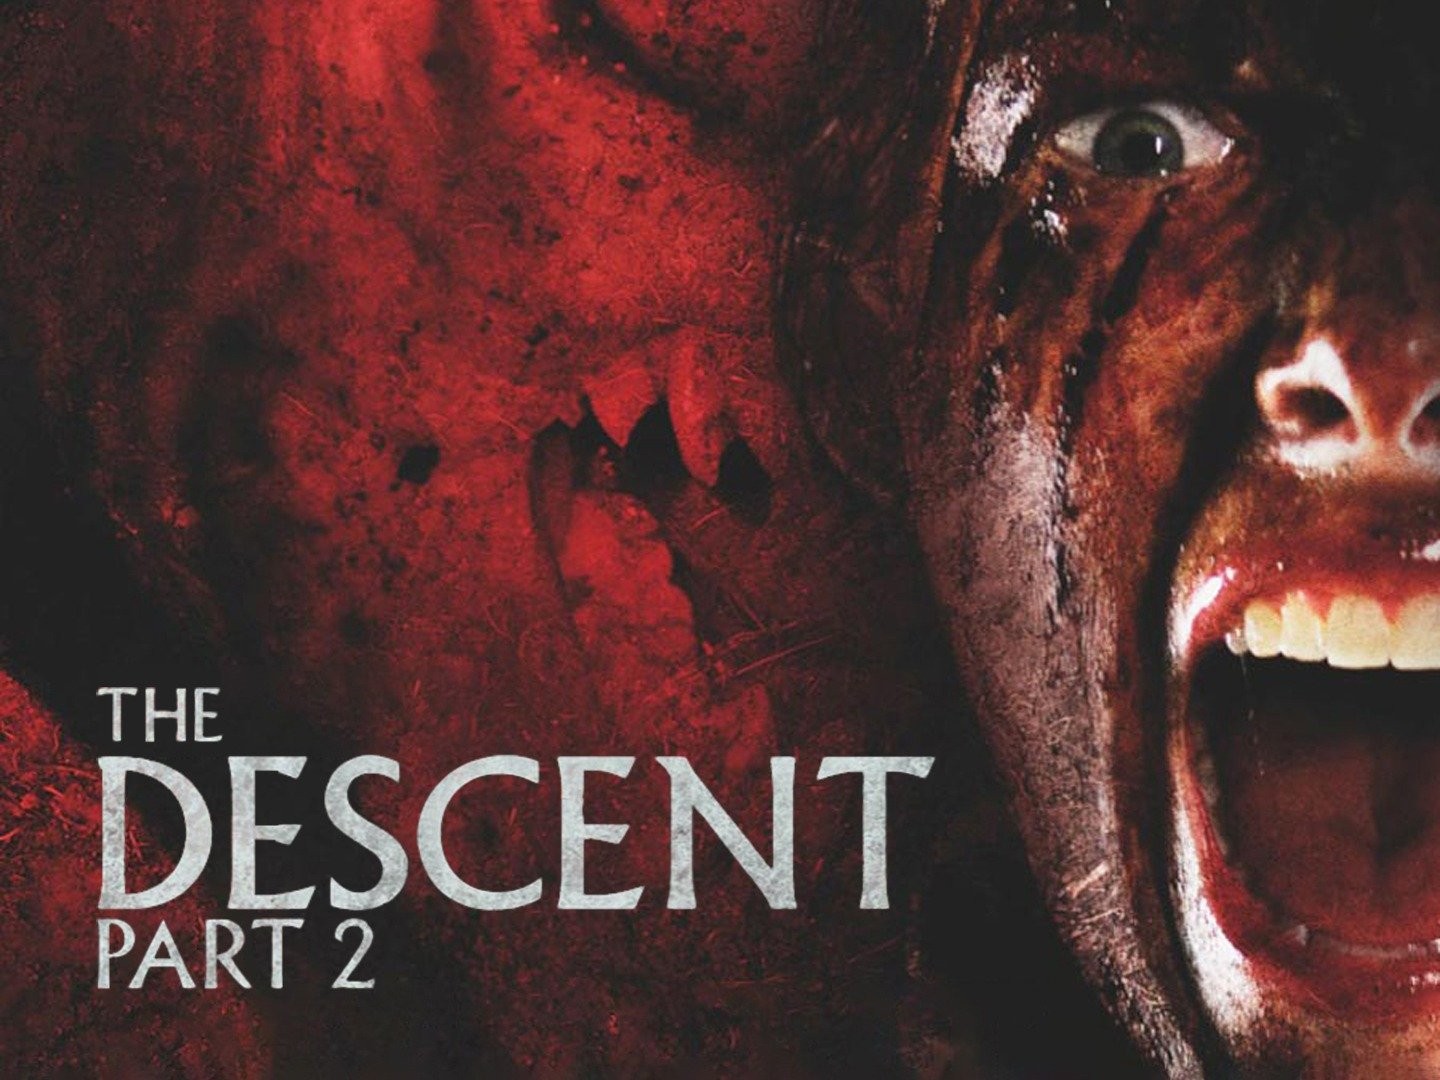 The Descent  Rotten Tomatoes